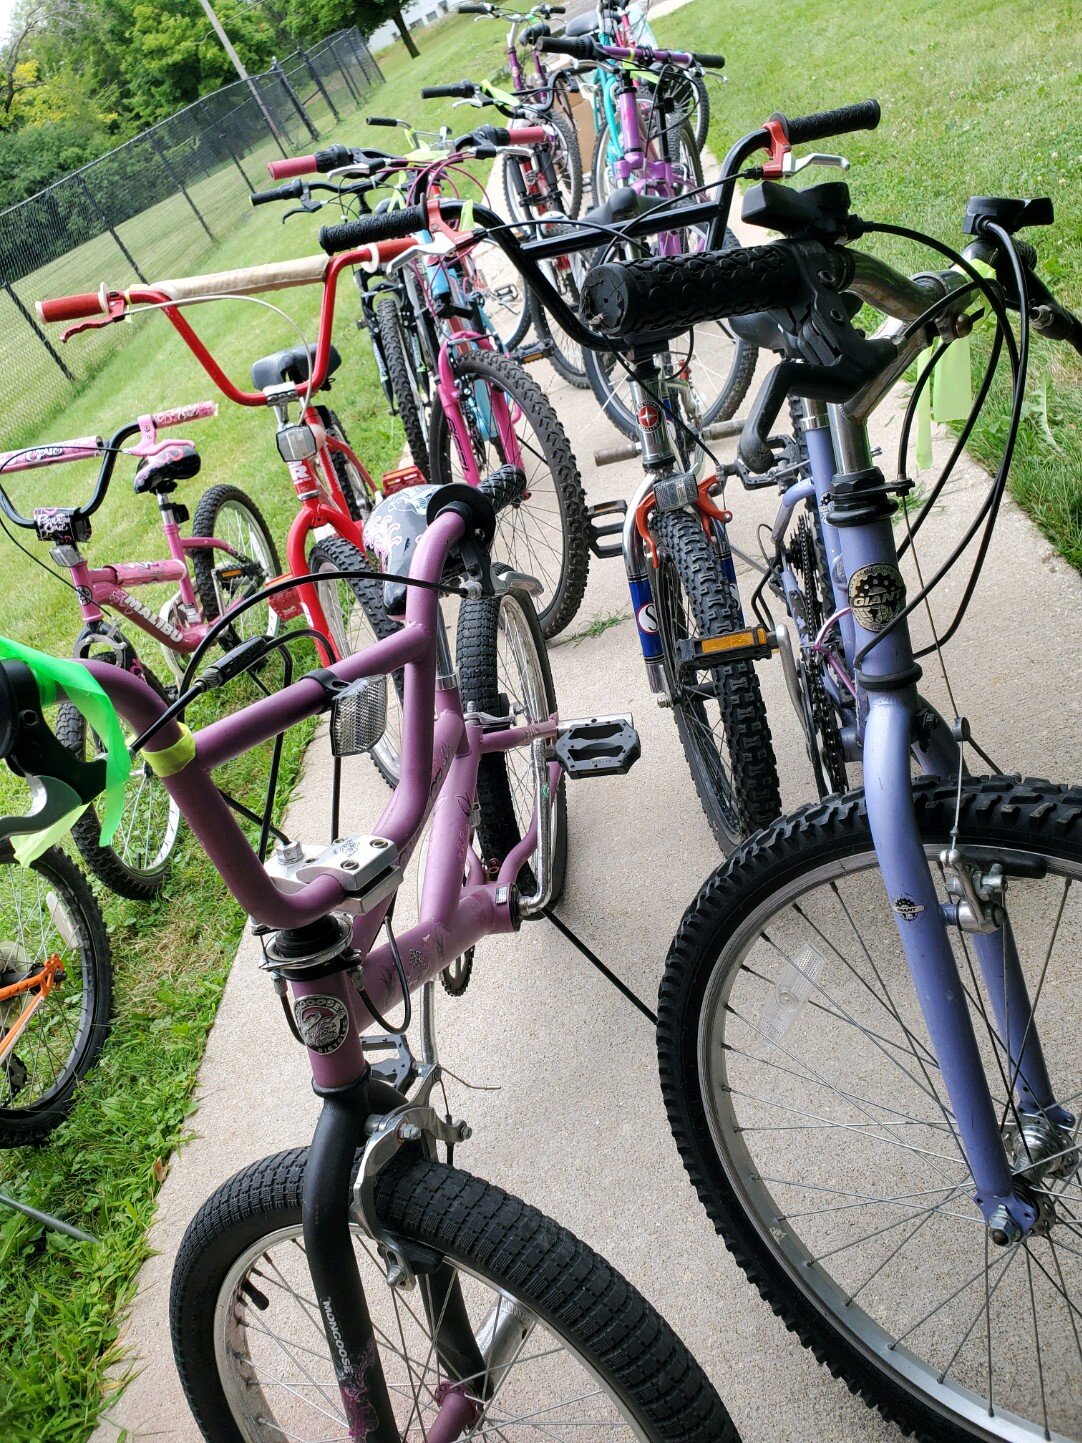 Some of the bikes donated to Whaley Children's Center.